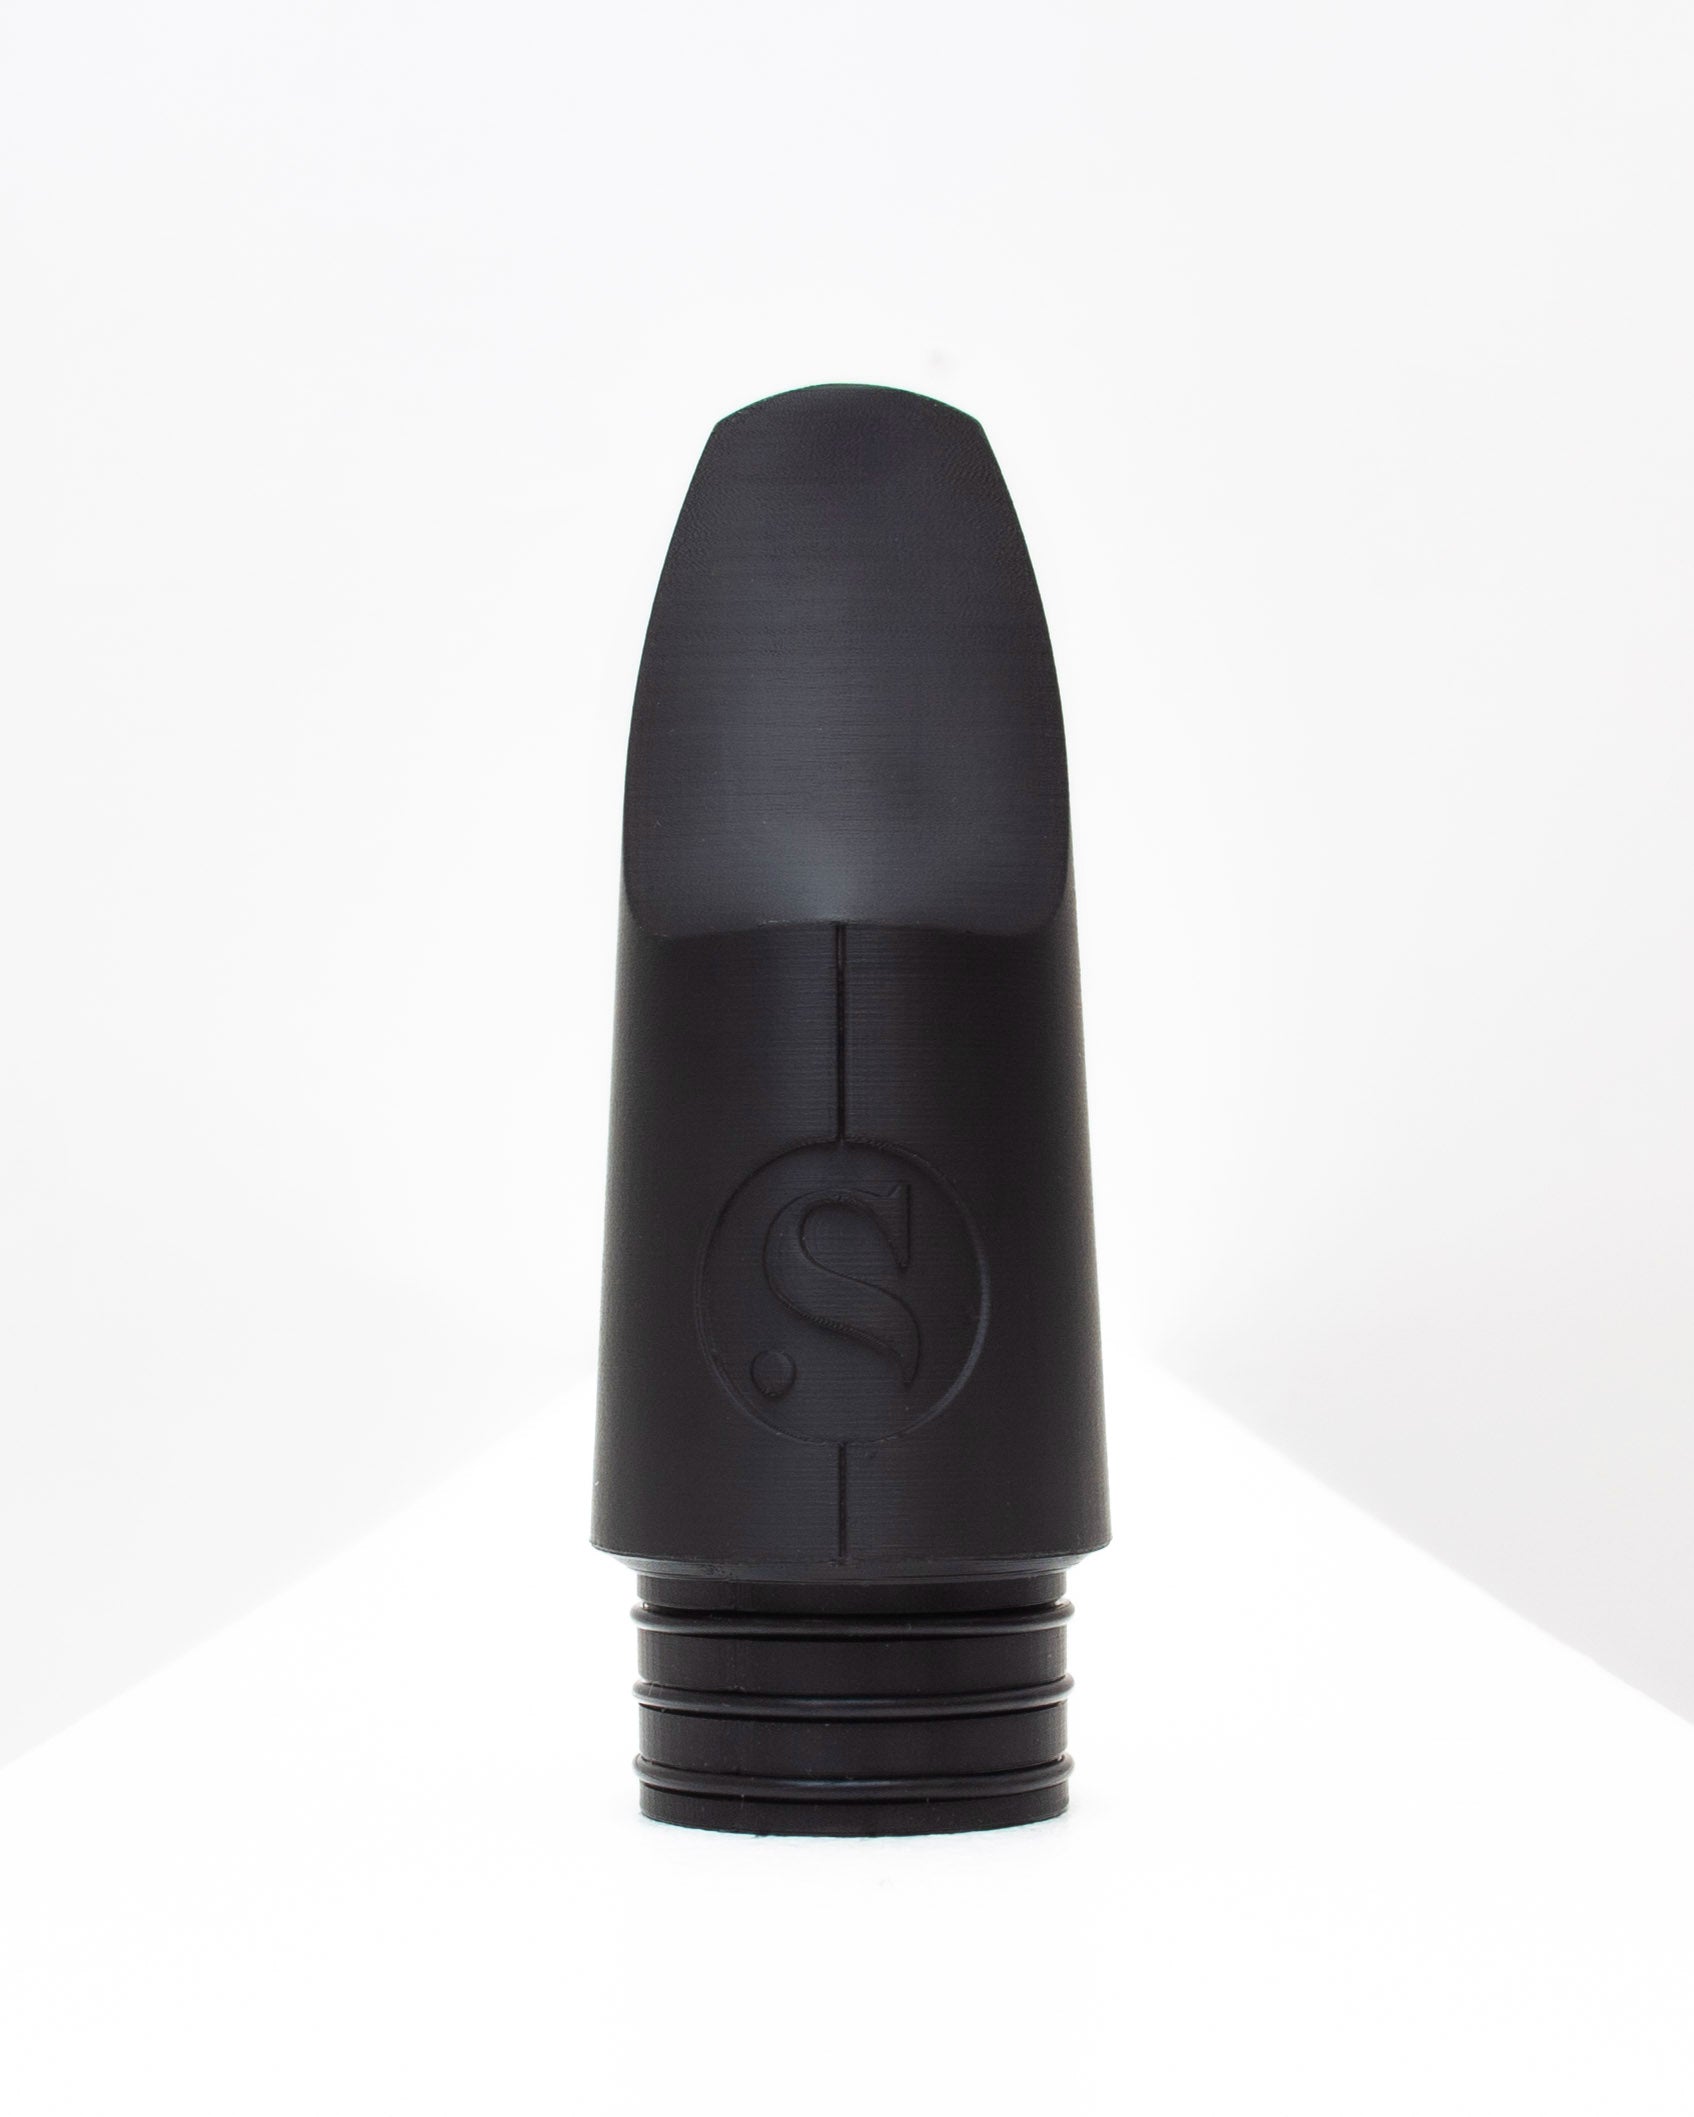 Bass Signature Clarinet mouthpiece - Todd Marcus by Syos - Pitch Black